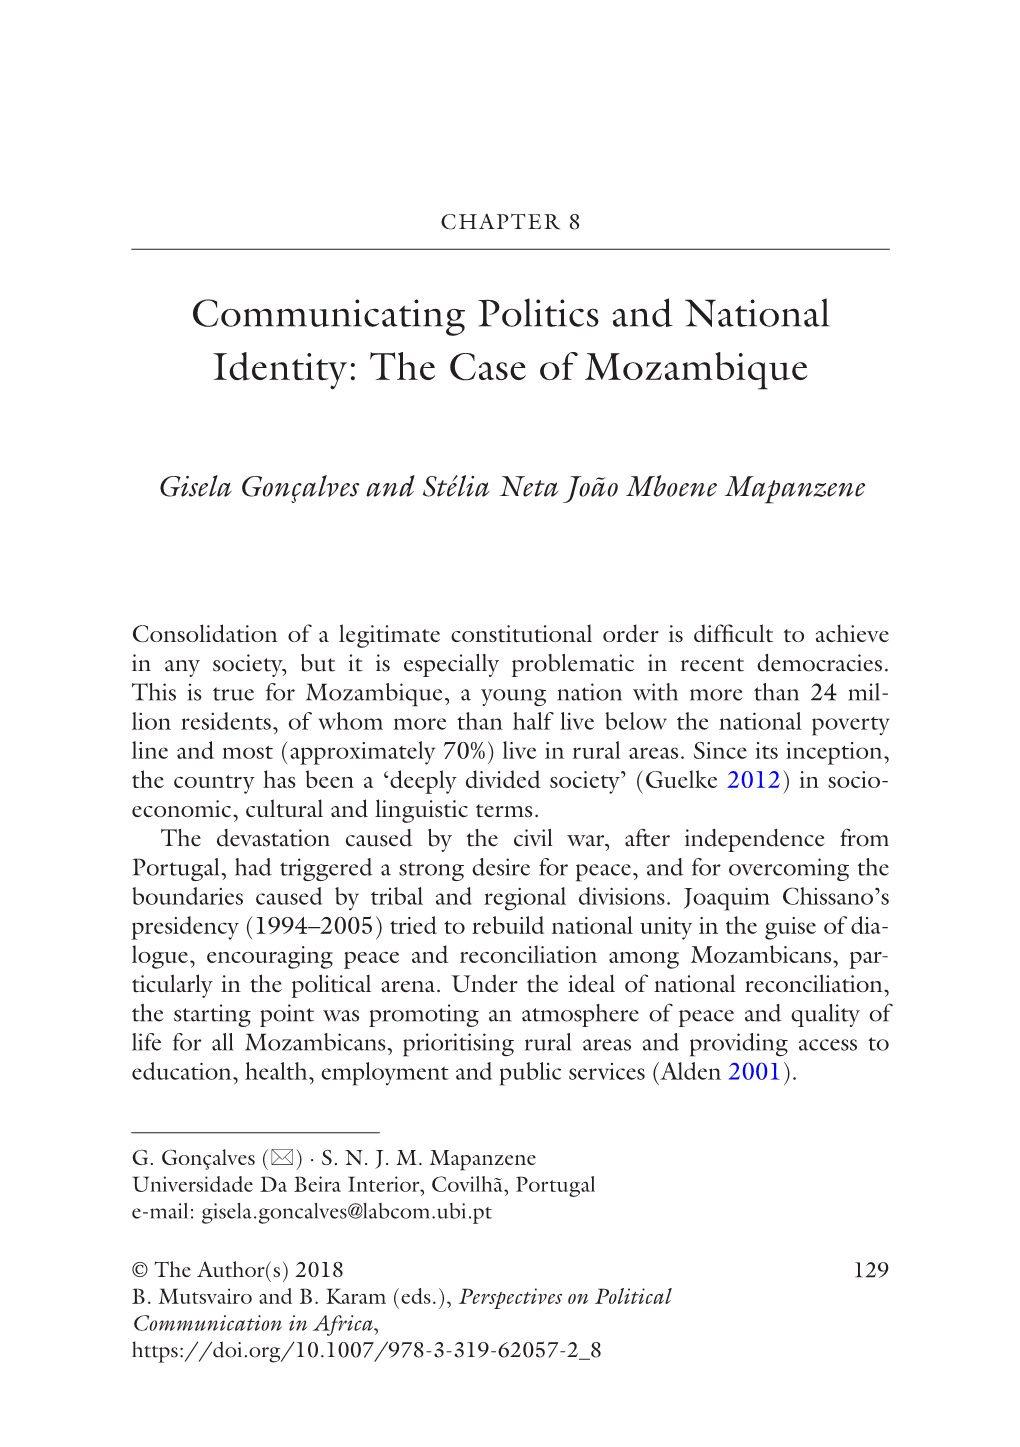 Communicating Politics and National Identity: the Case of Mozambique